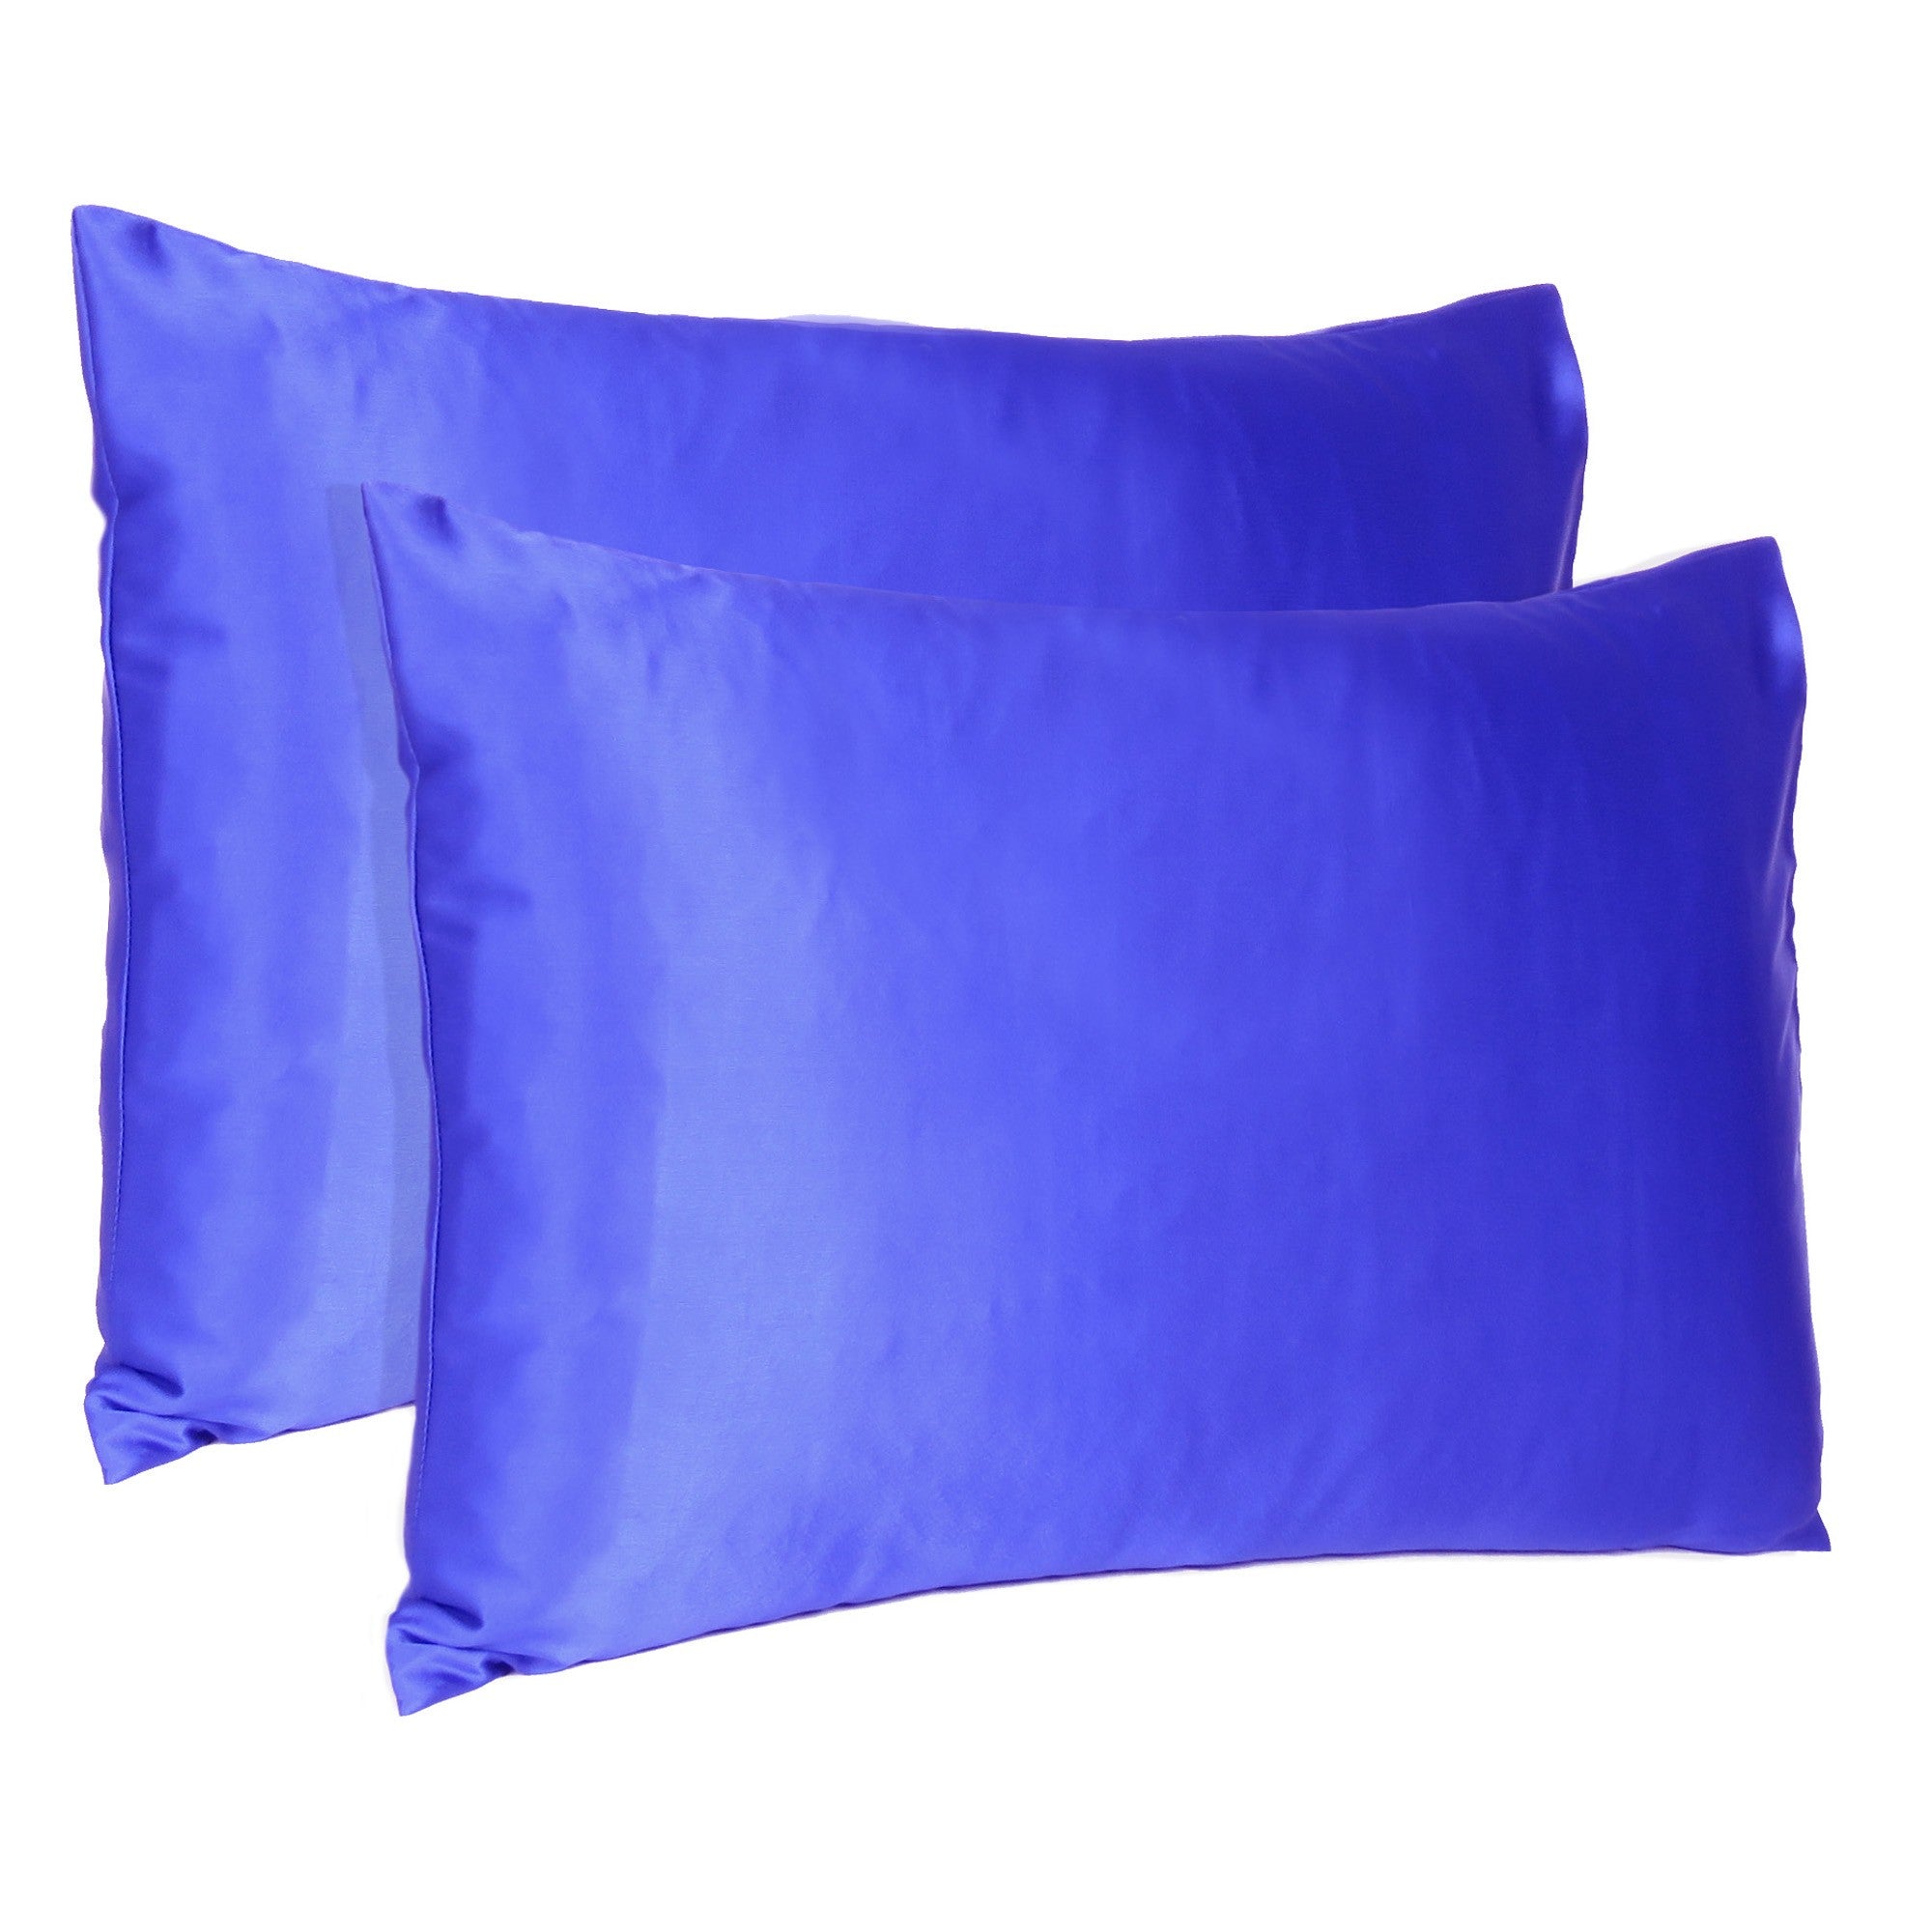 Royal-Blue-Dreamy-Set-Of-2-Silky-Satin-Standard-Pillowcases-Bed-Sheets